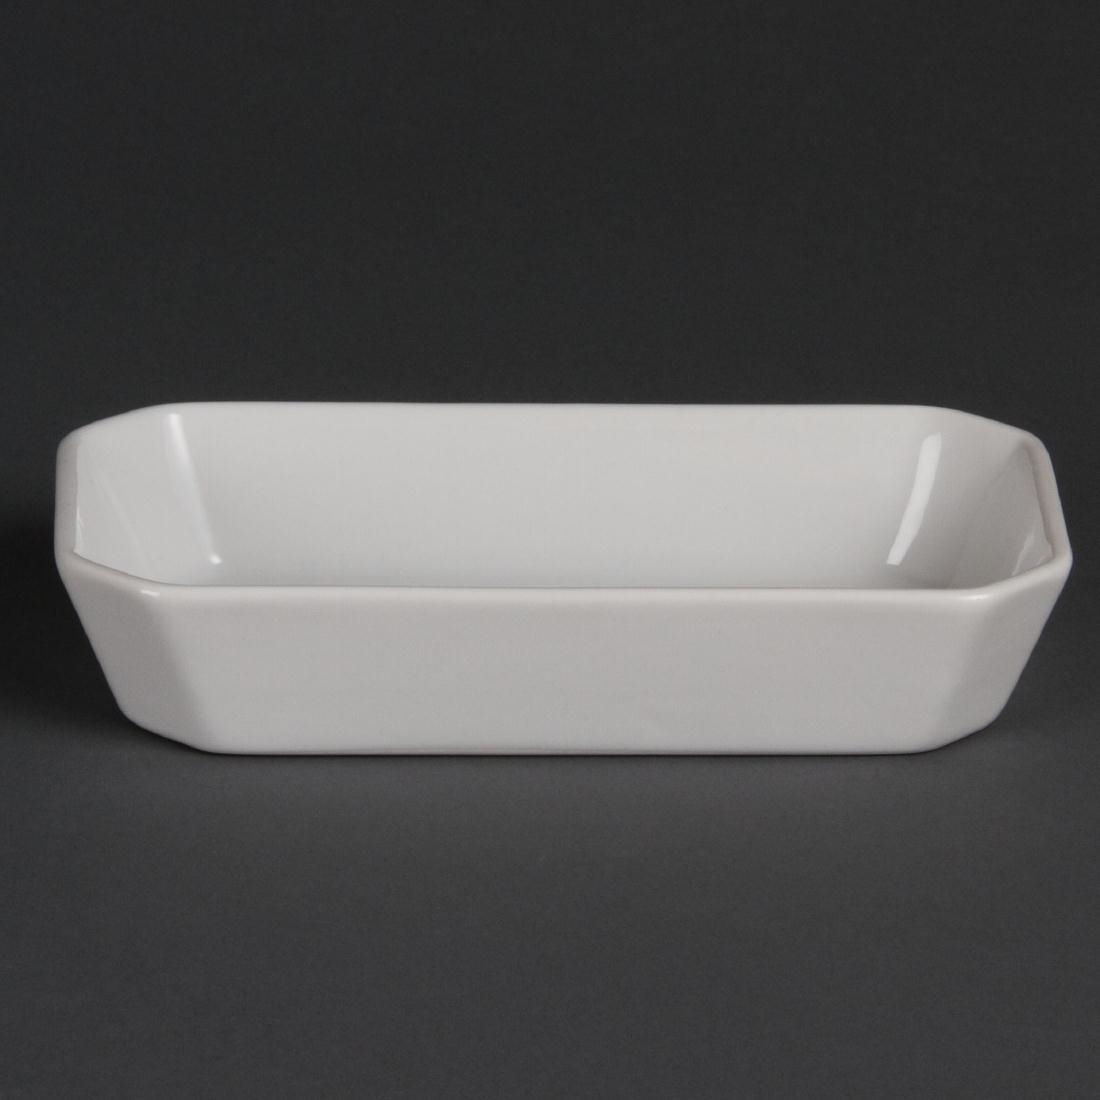 Olympia Whiteware Oblong Hors d'Oeuvre Dishes 185mm